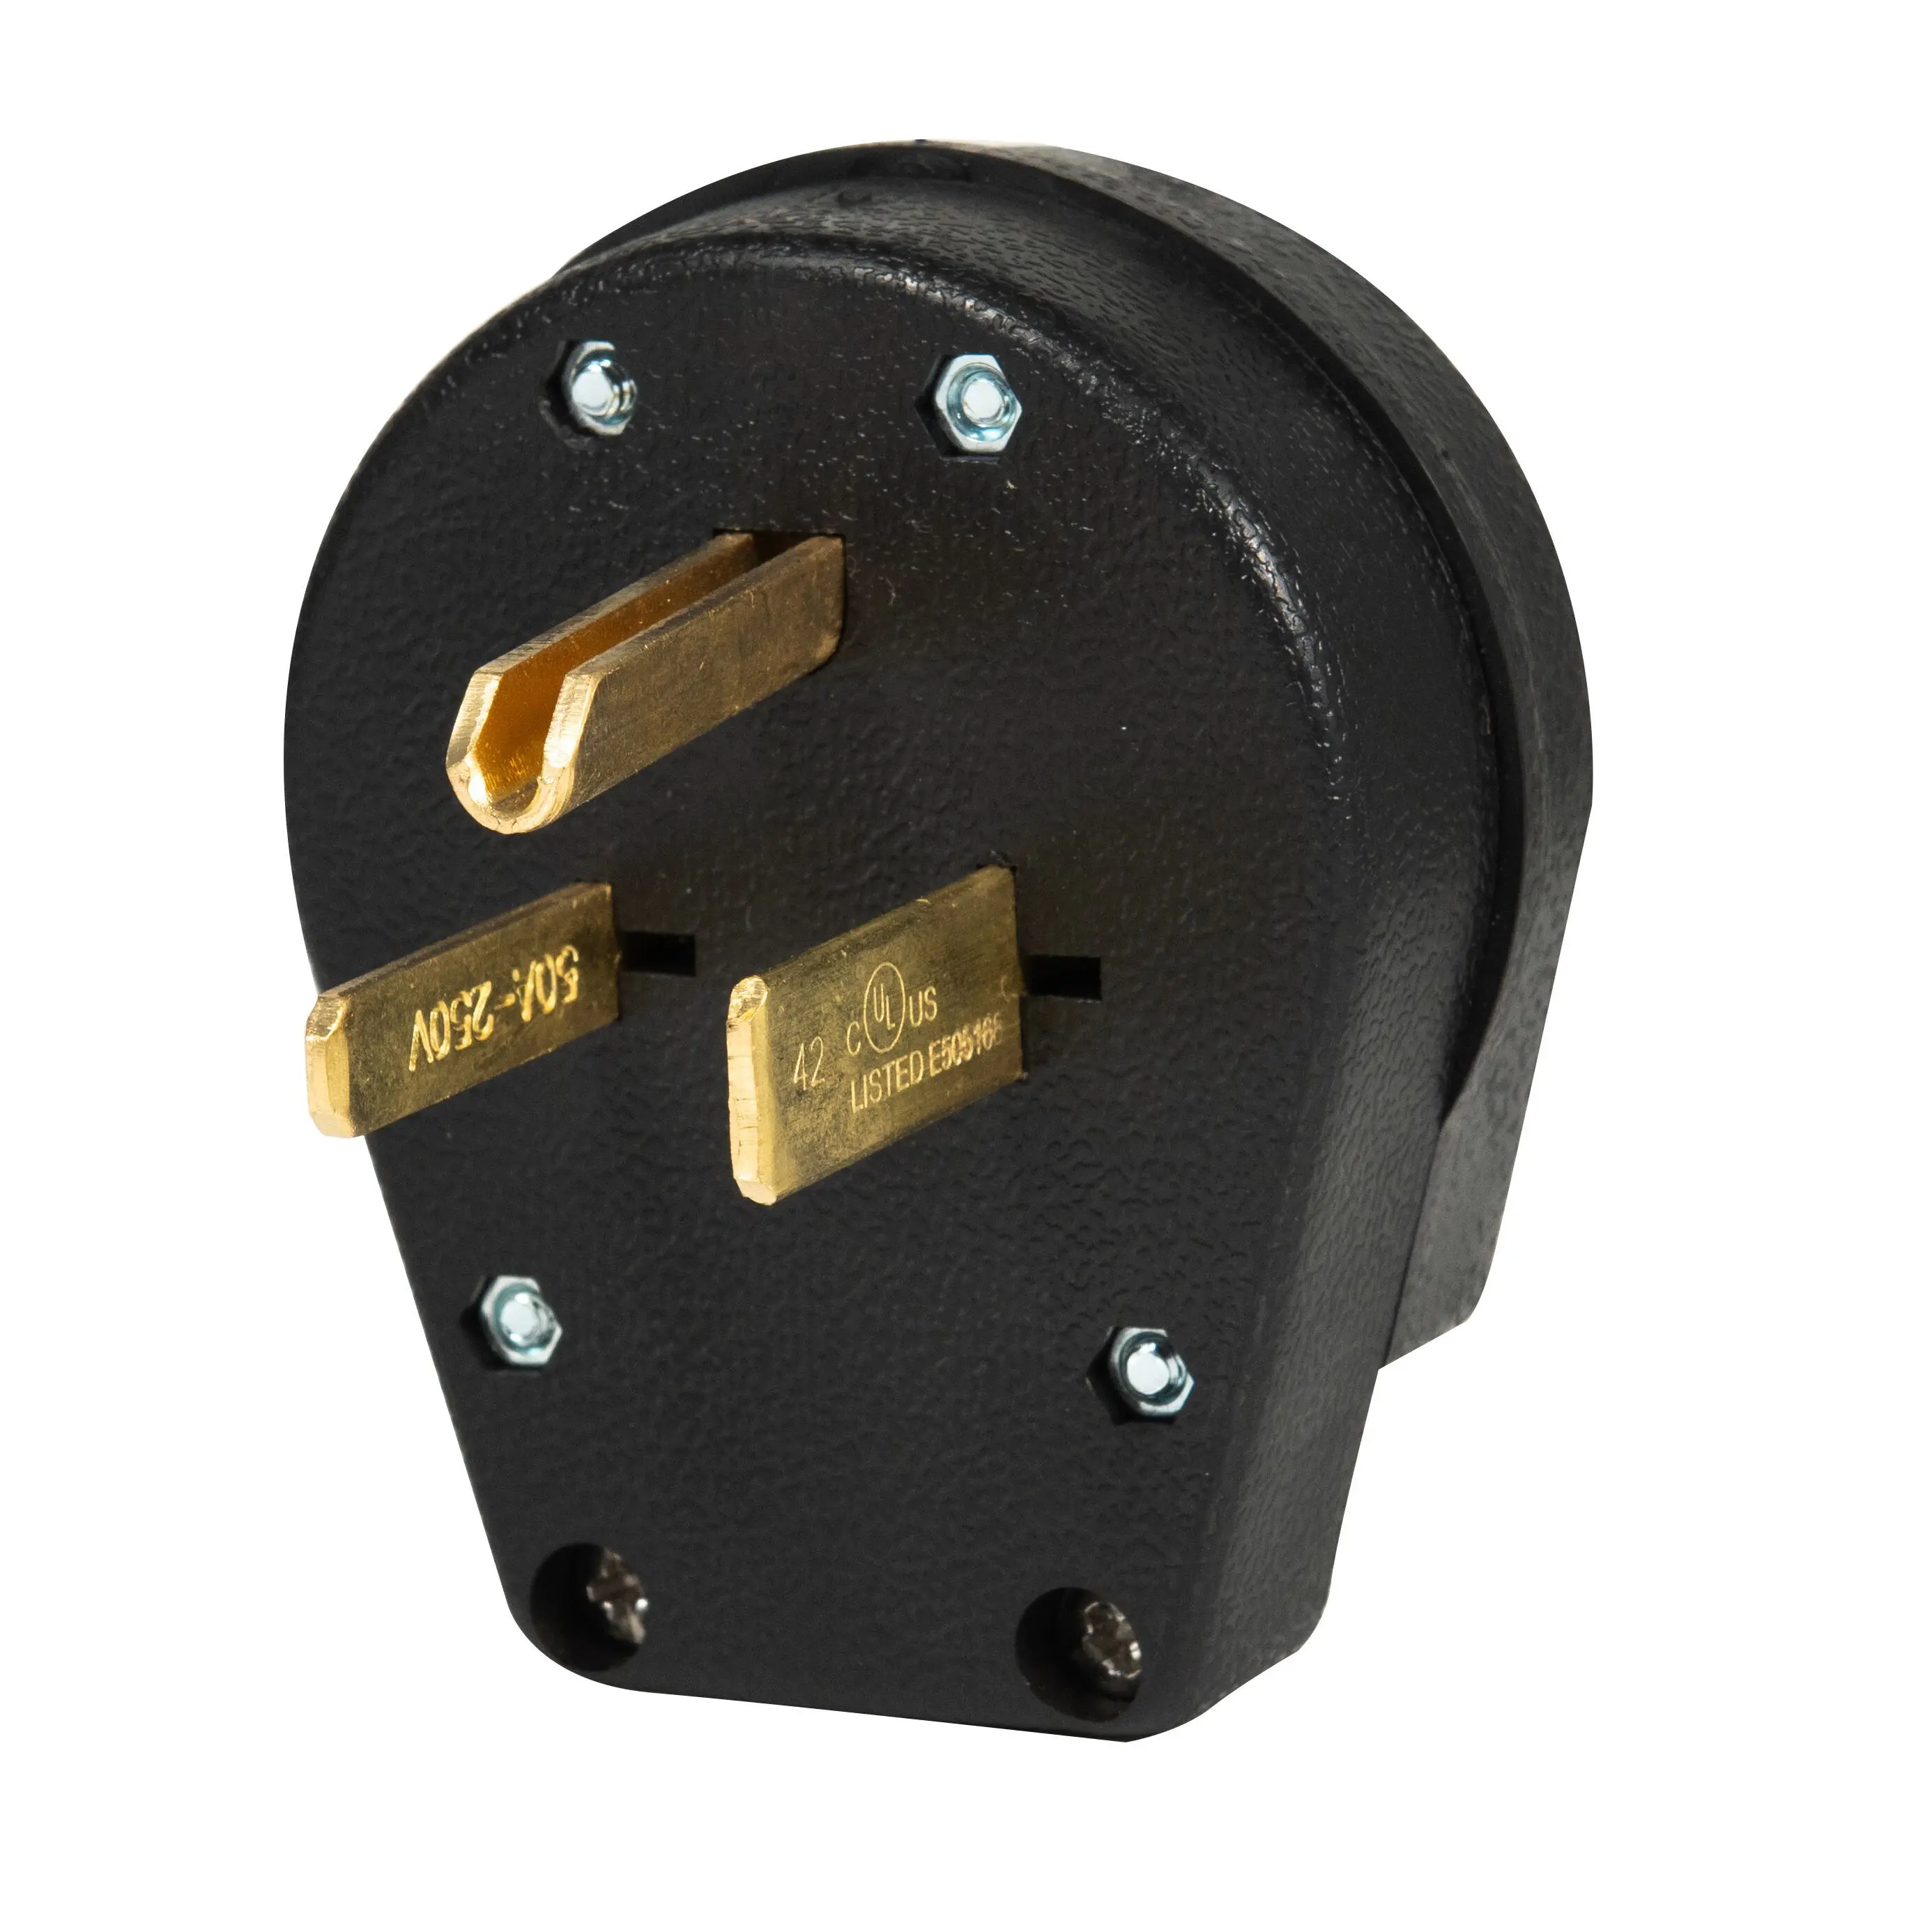 250V 3 WIRE GROUNDING OUTLET 50A Details about   GE 4141-3 BLACK 2 POLE 